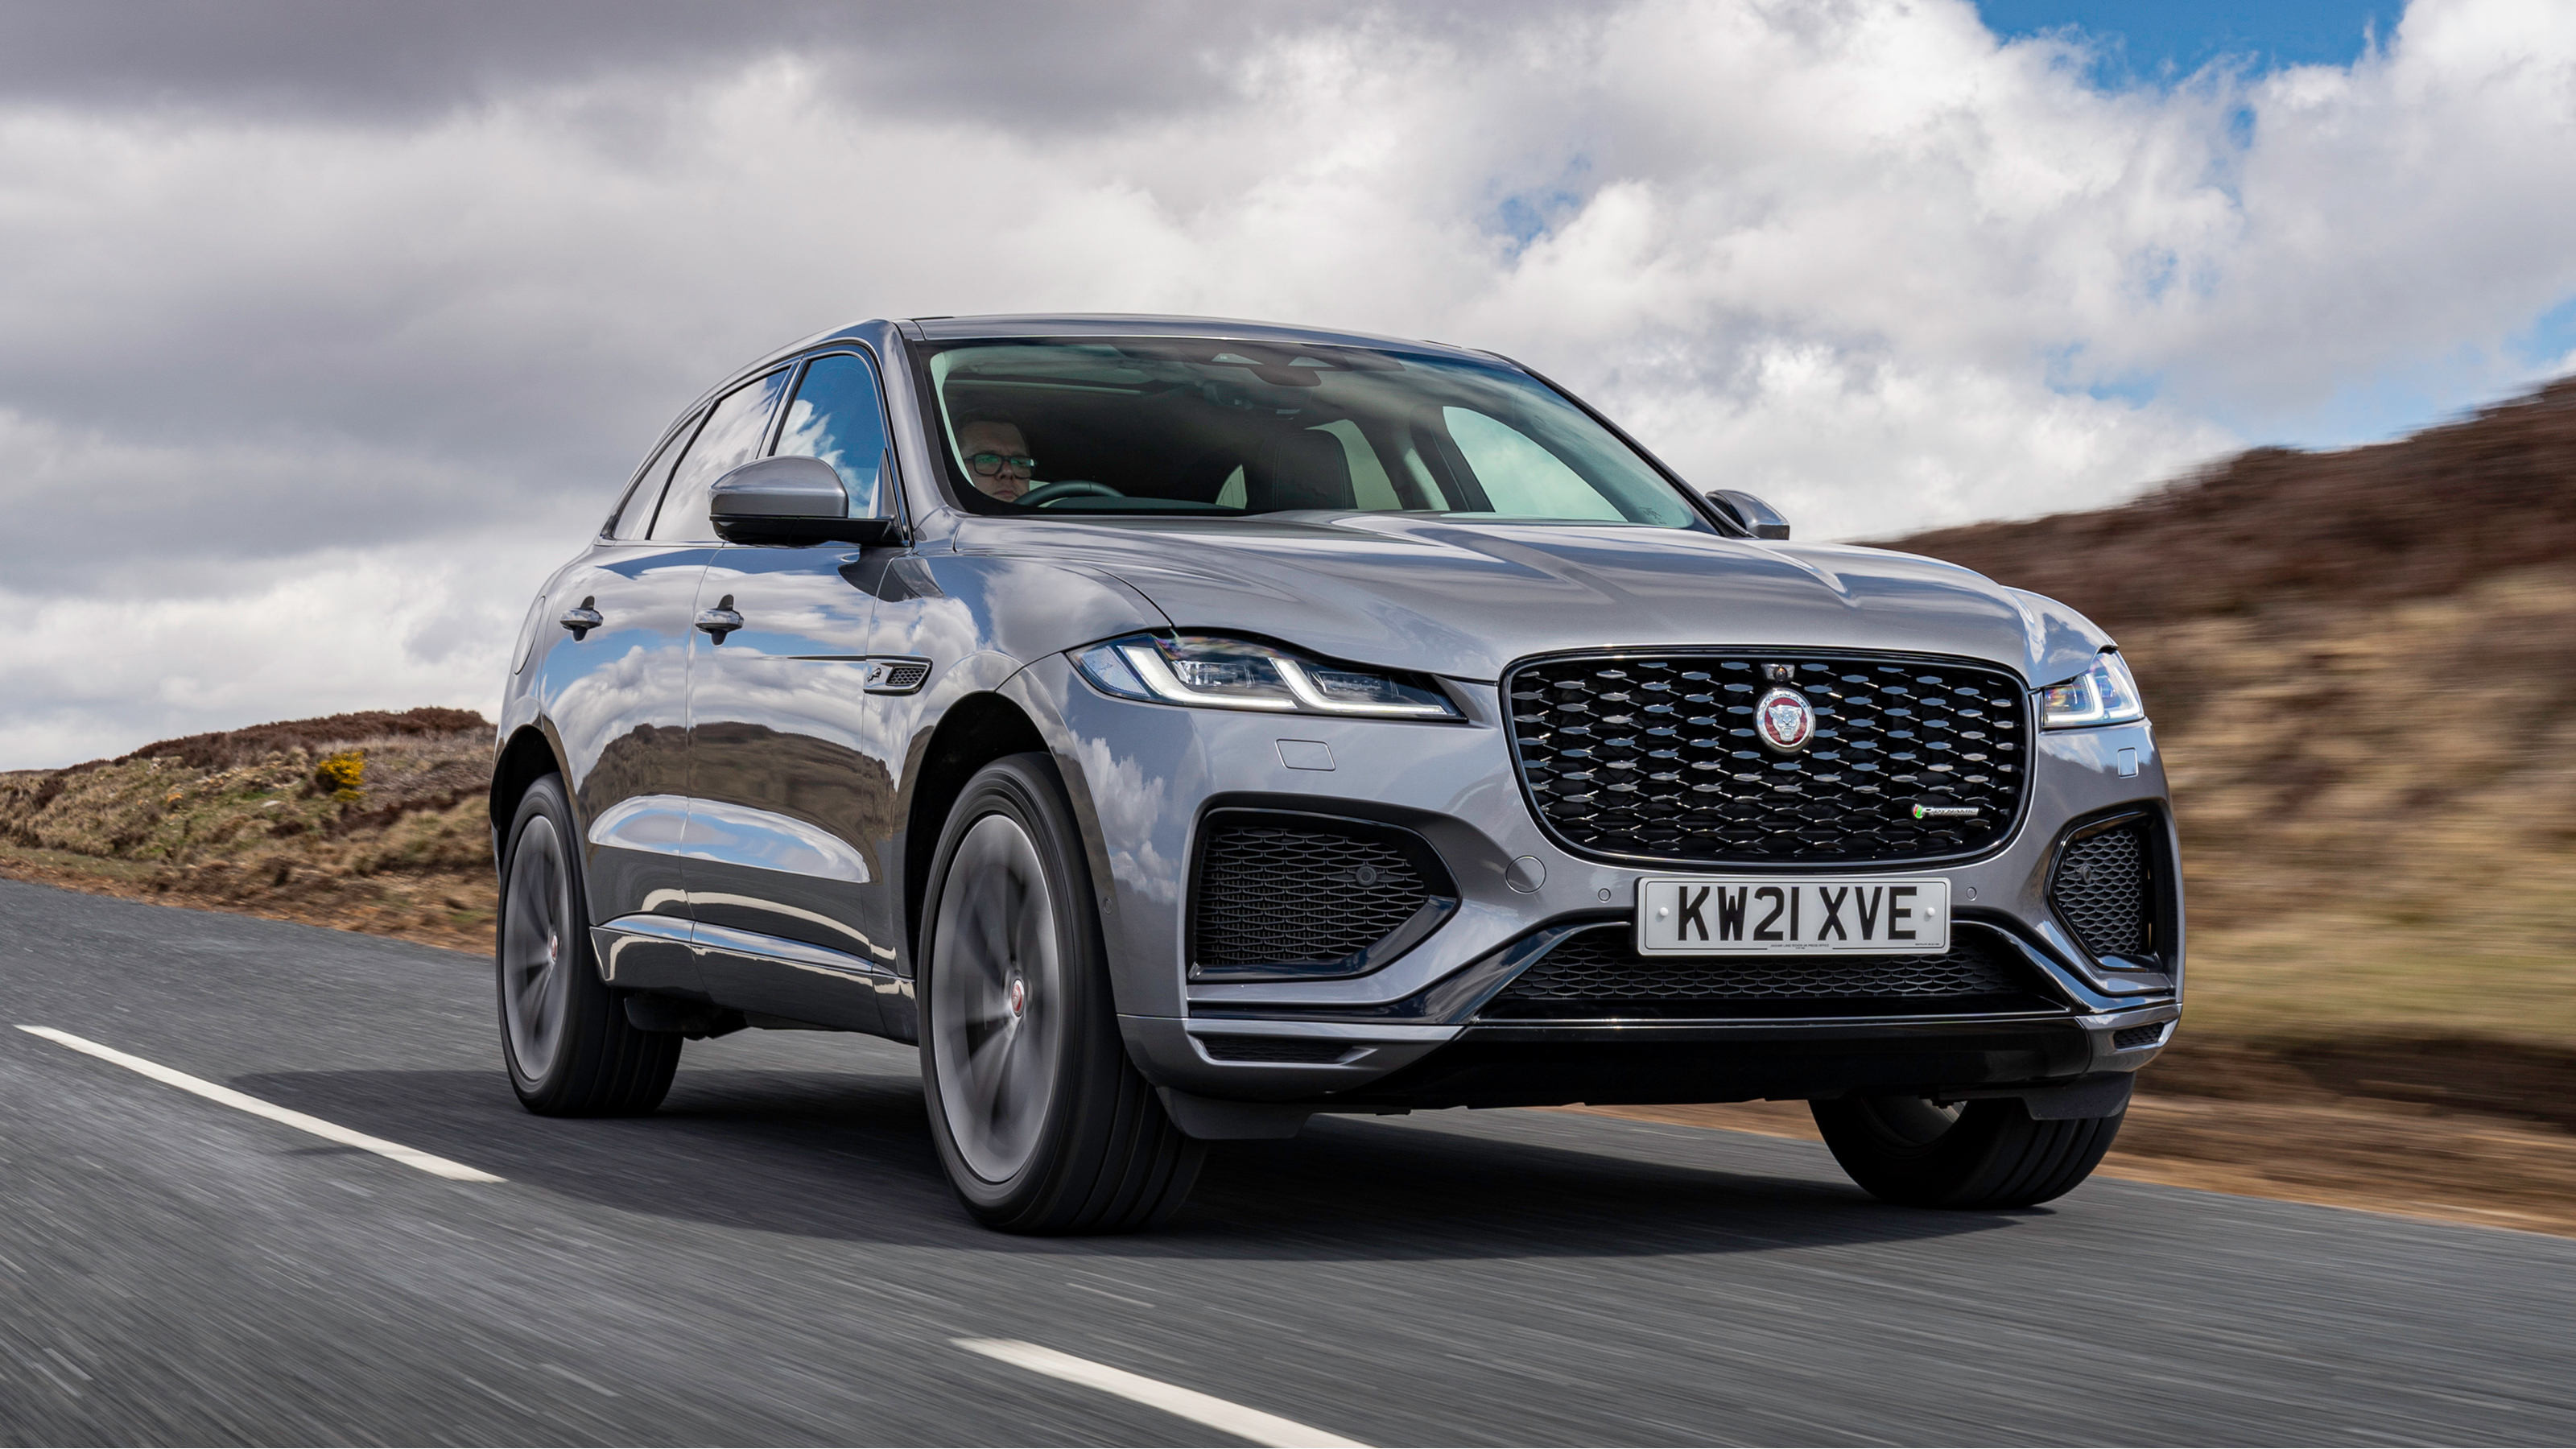 Jaguar F-Pace review - performance and 0-60 time | evo